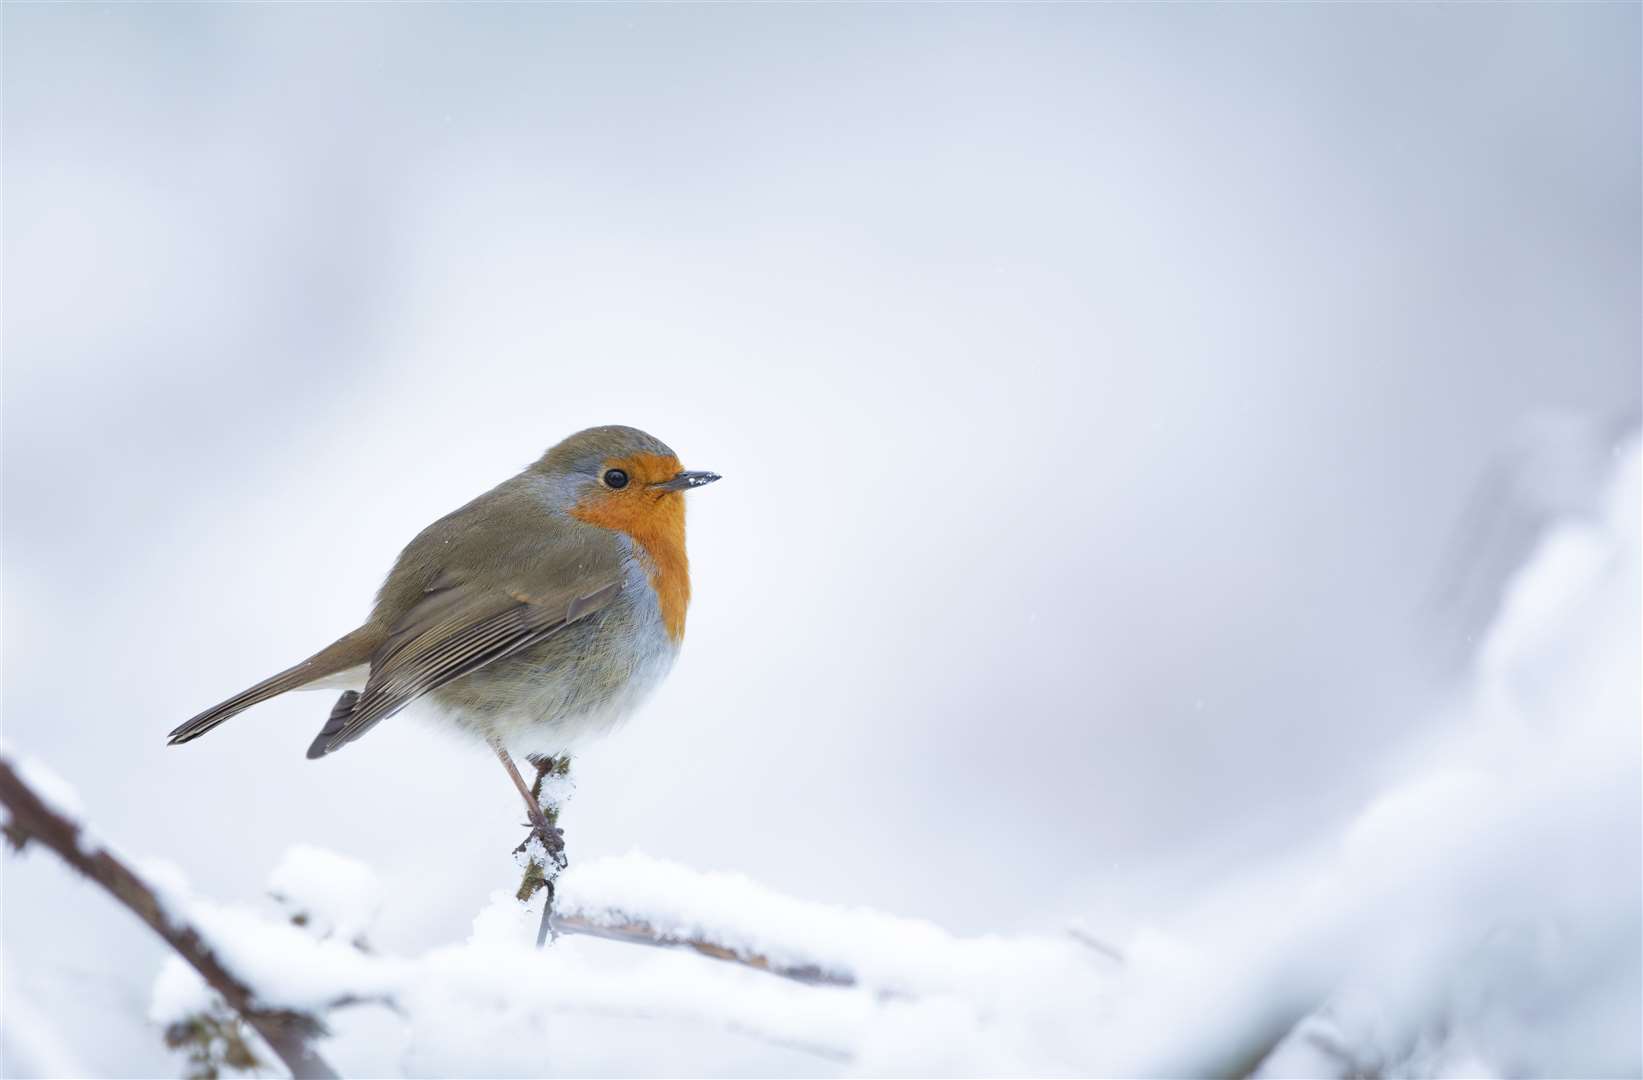 The robin's numbers are declining Picture: RSPB Images